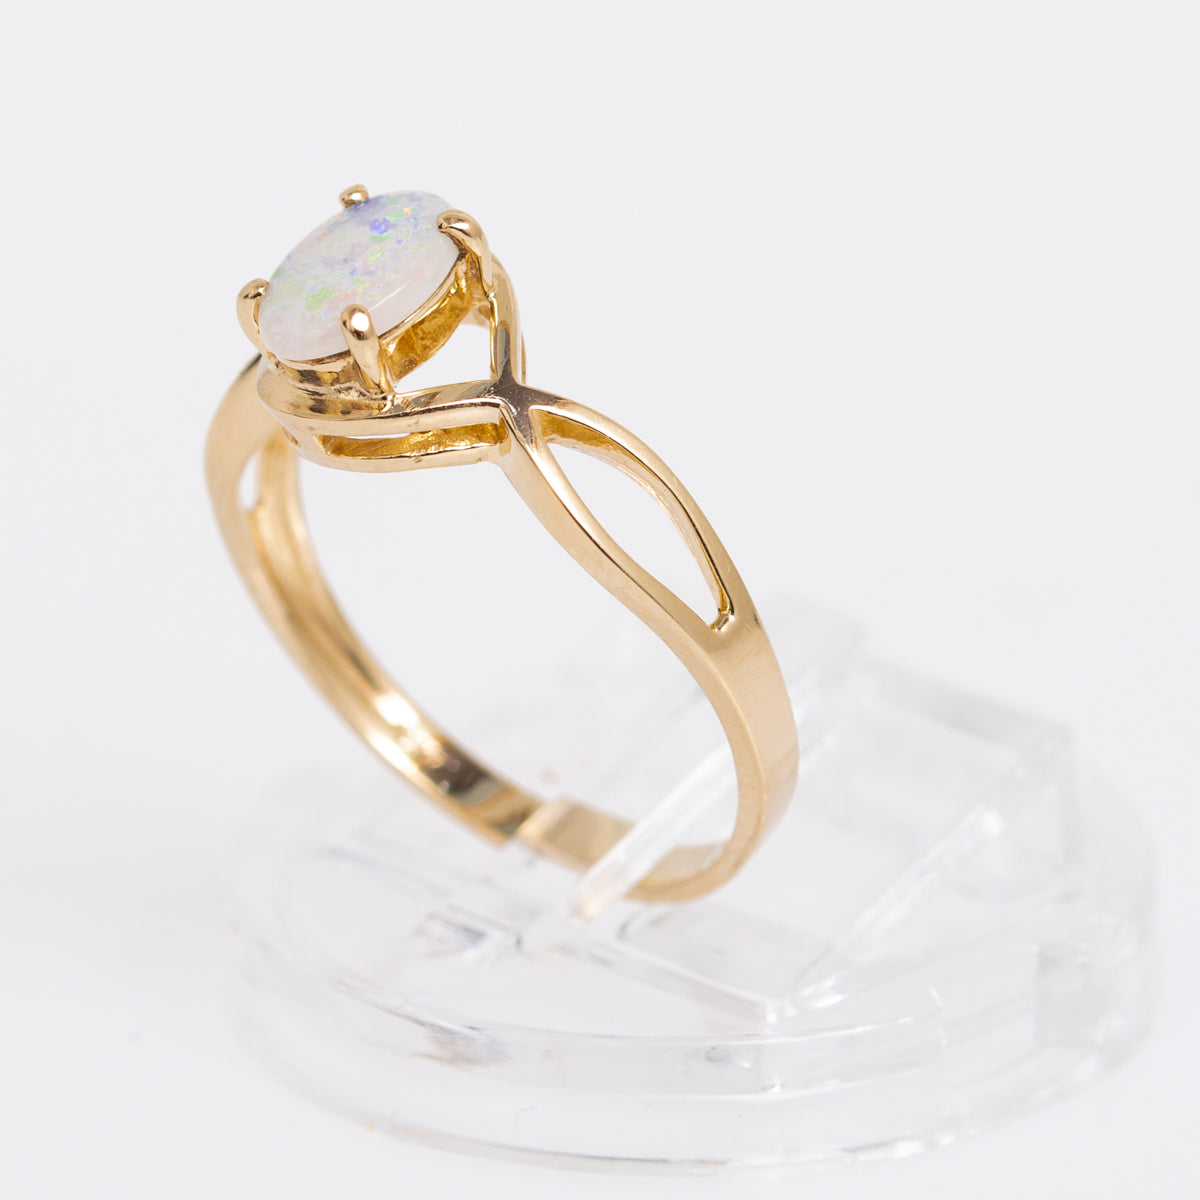 Elegant Ladies 10K Gold & White Opal Ring With Decorative Band Size M1/2 (A1139)